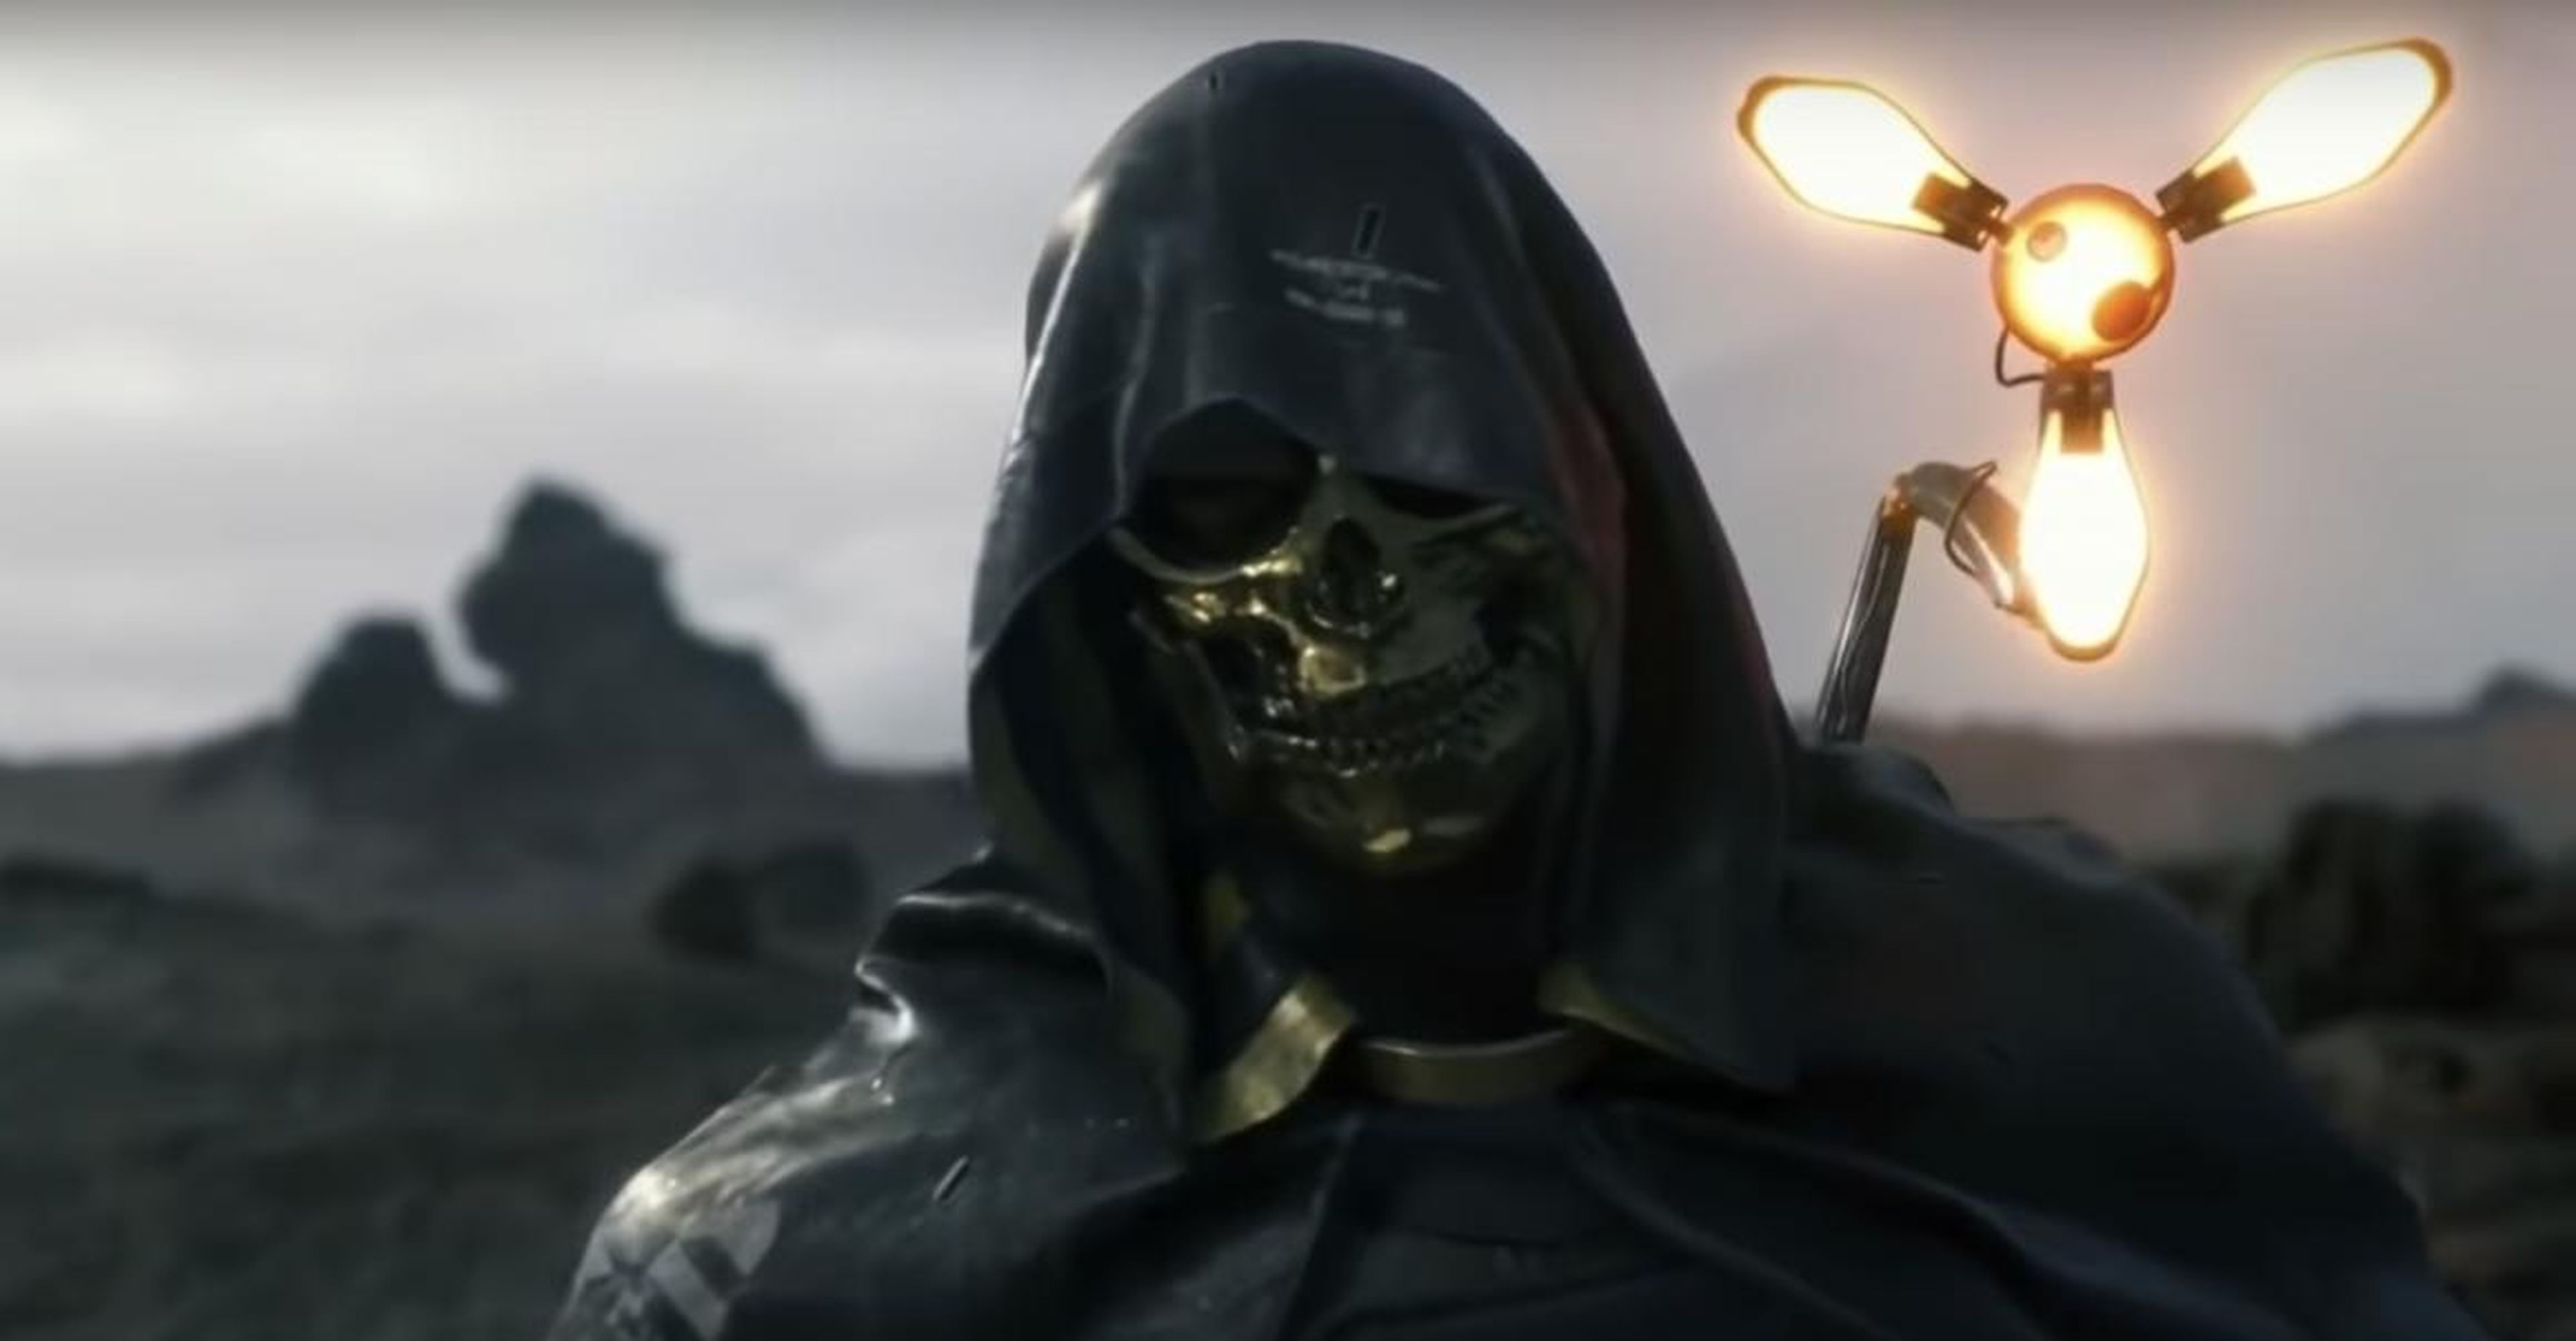 "Death Stranding" is an upcoming PlayStation-exclusive game that is expected to come to both PlayStation 4 and PlayStation 5.